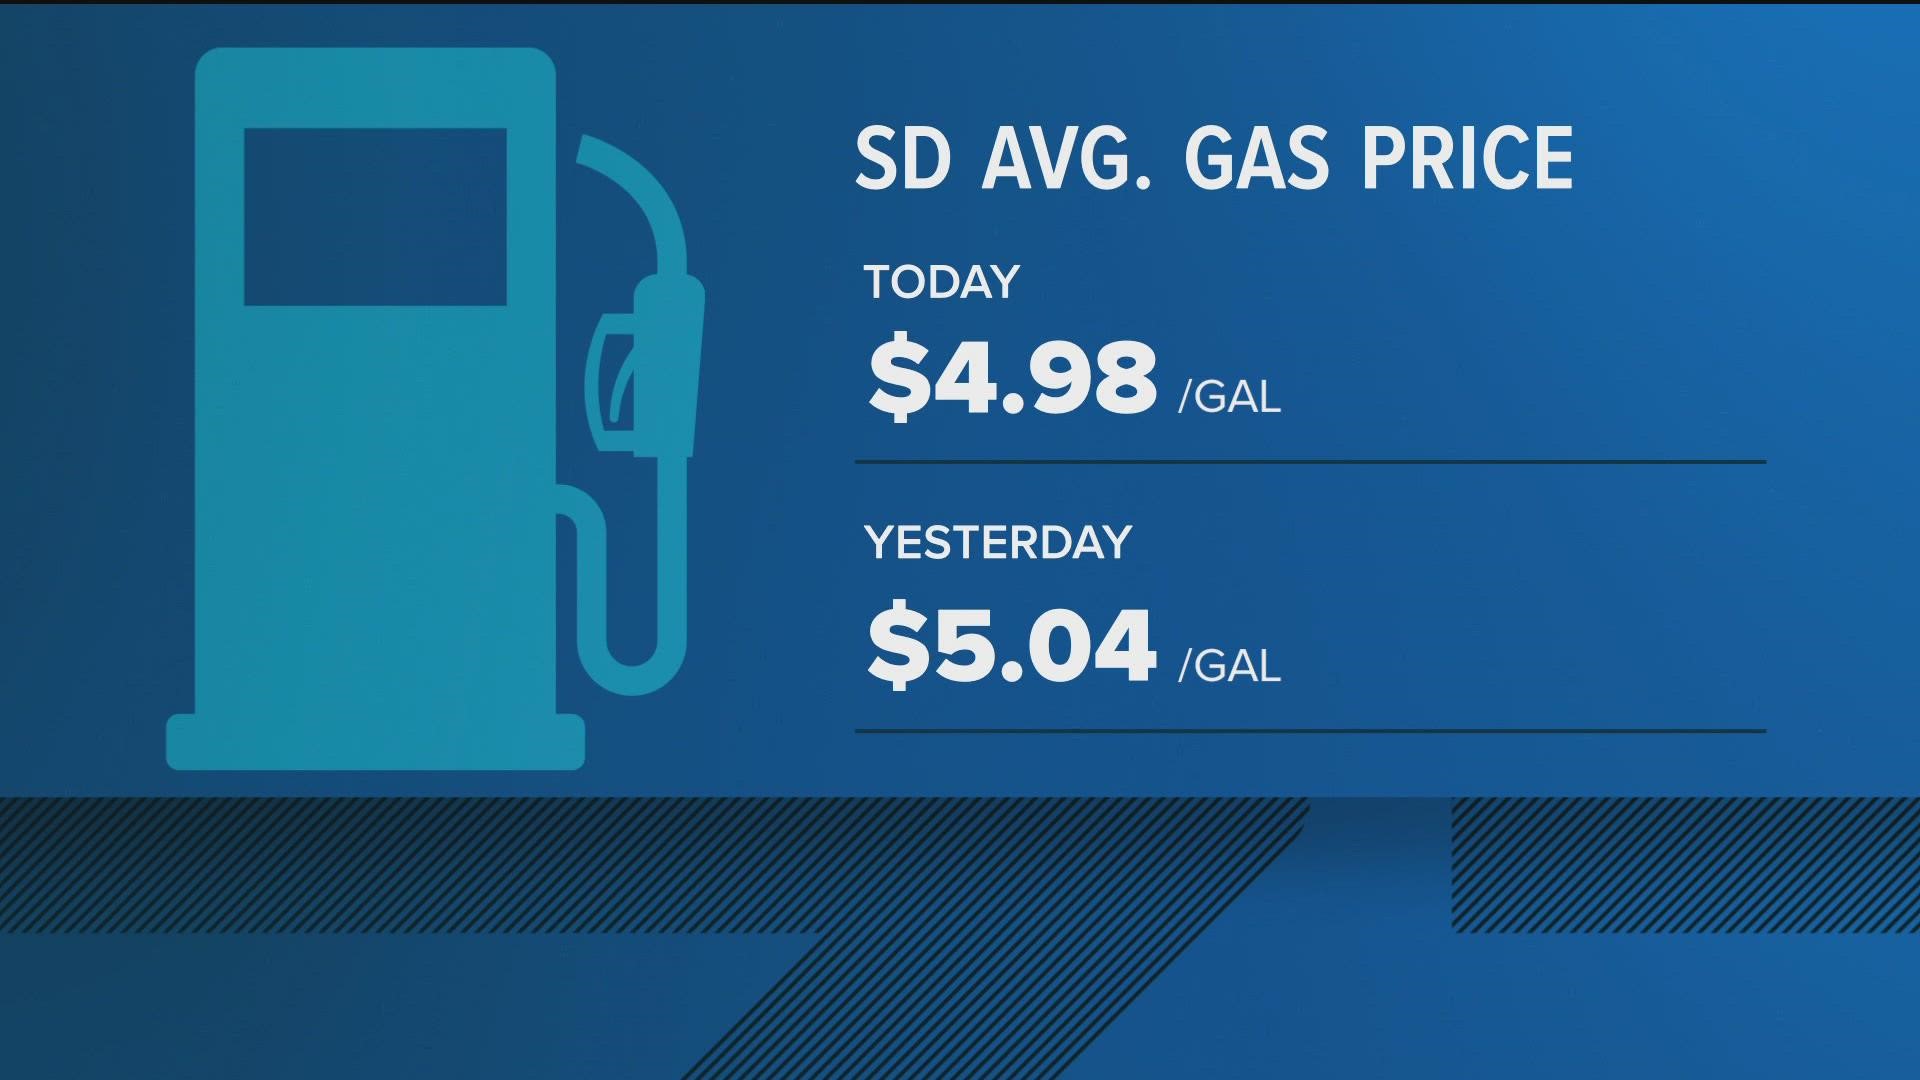 In this update we cover the fact that gas is finally below $5 a gallon and the county is set to vote on if people receiving subsidized housing need to be drug free.